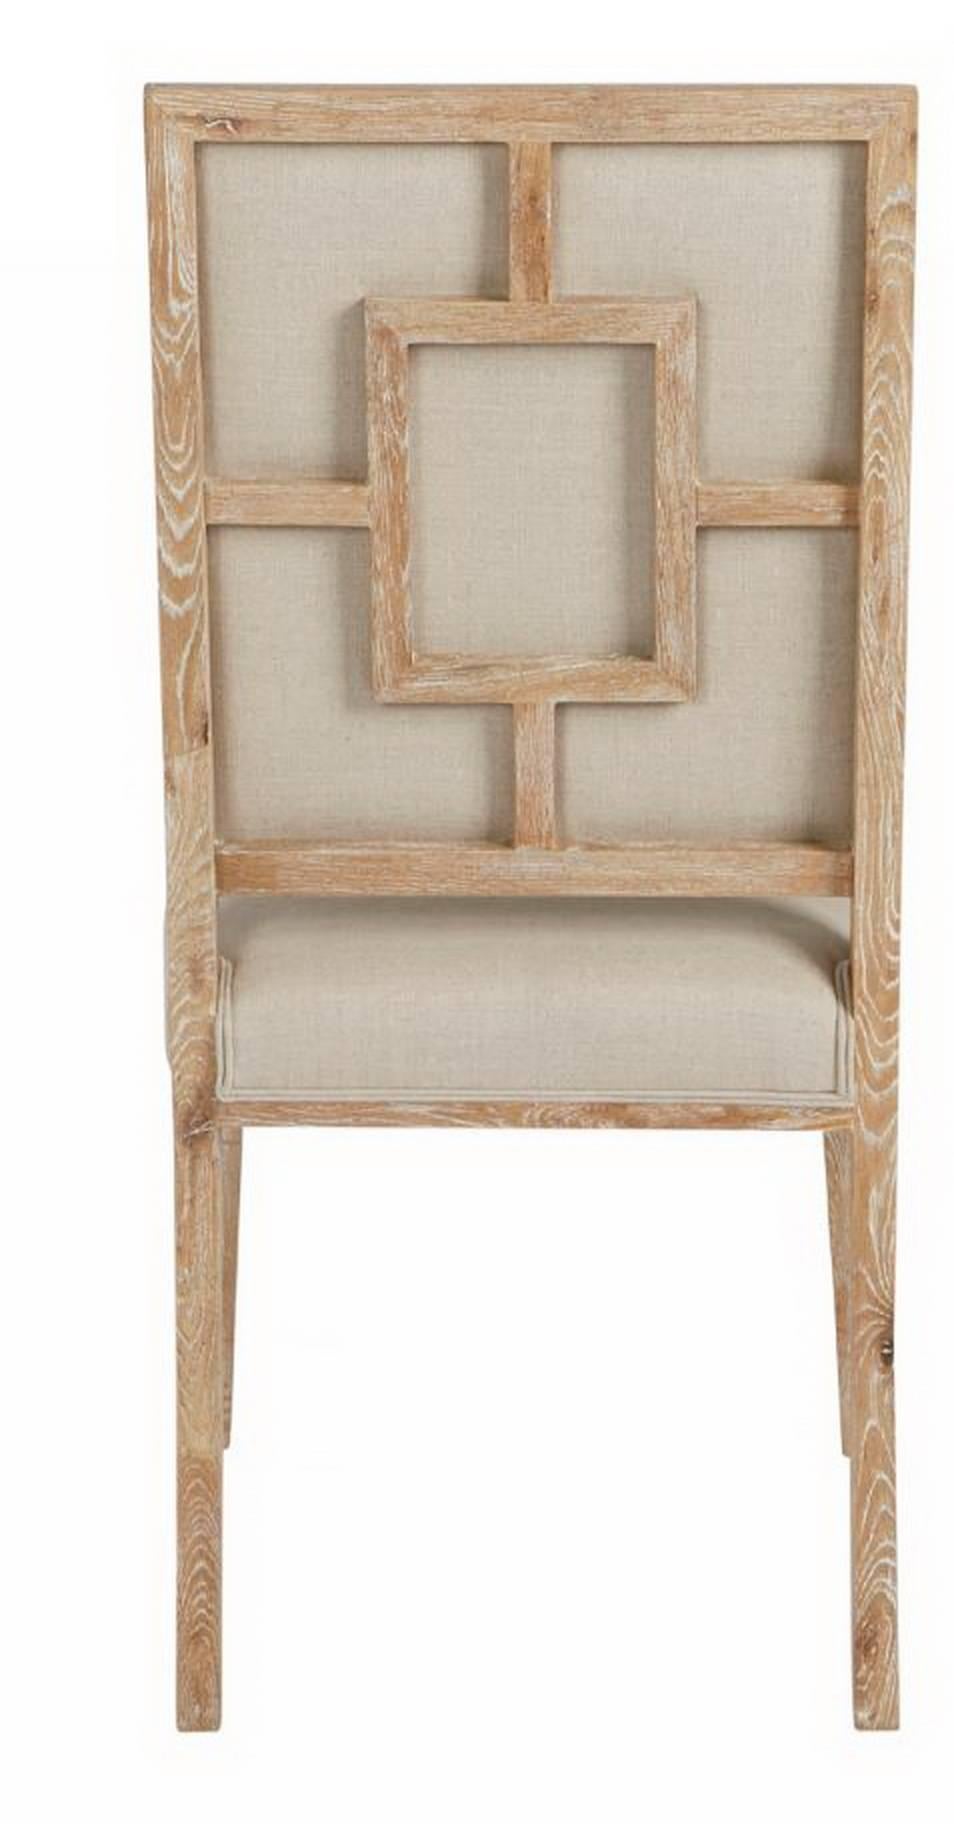 White wash upholstered dining chair with straight back and trellis design to rear.
Can be ordered in other colors, 4 weeks lead time.
 